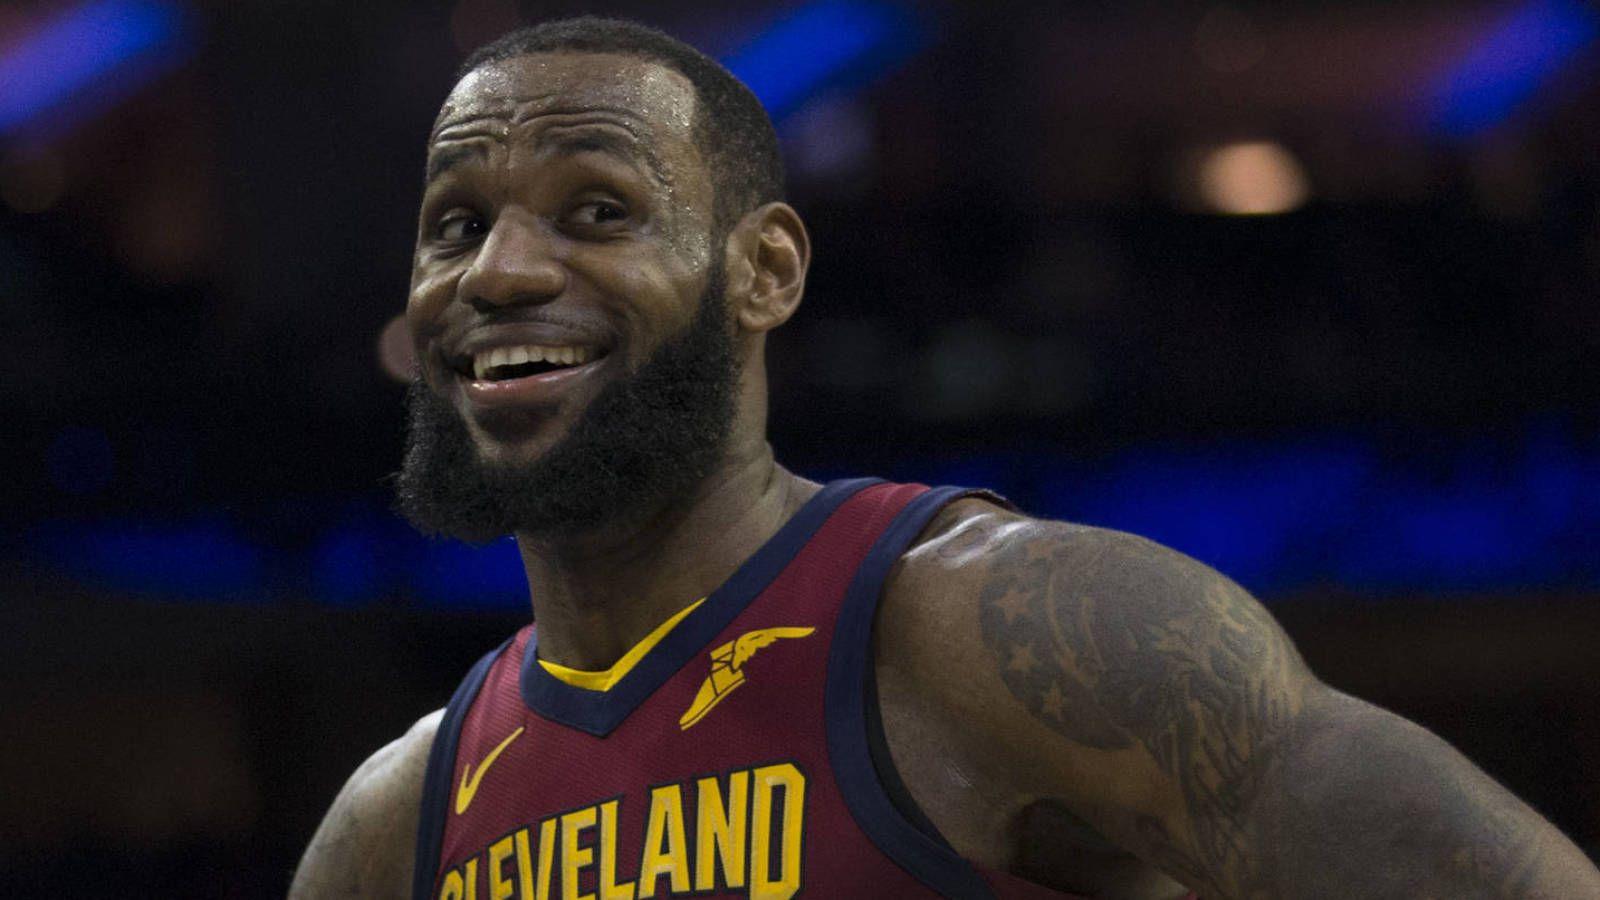 LeBron to incorporate 'Space Jam 2' into free agency announcement